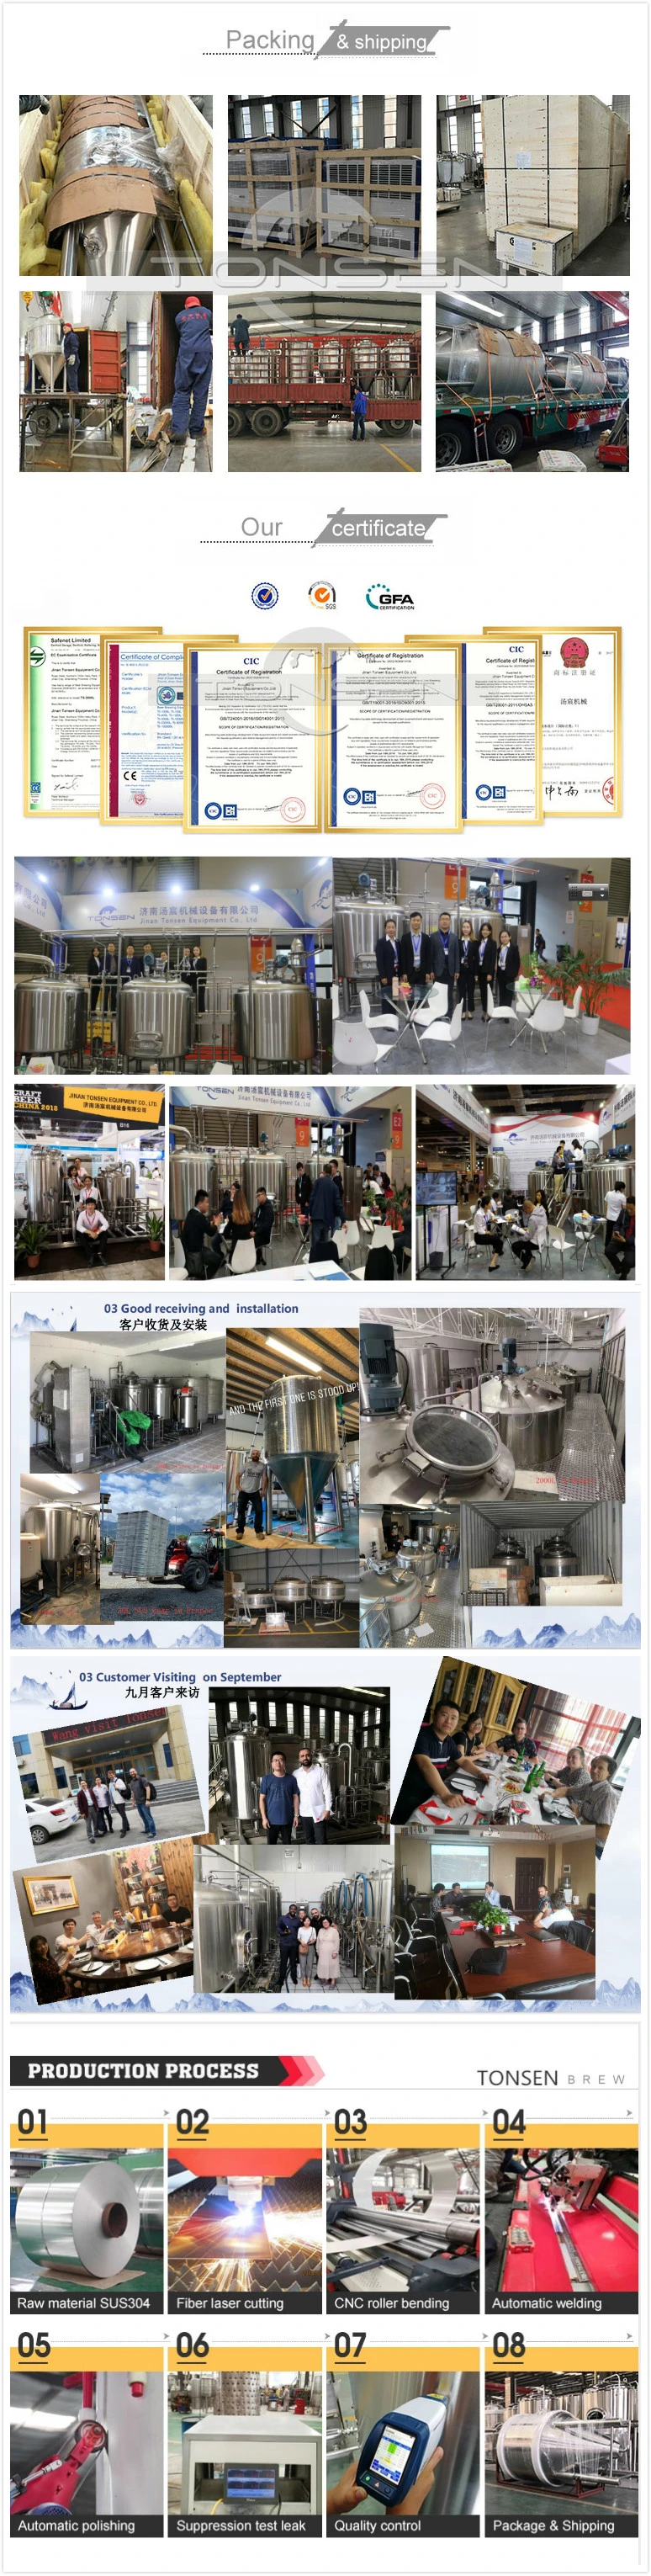 1000L 10bbl 10hl Beer Brewing Equipment Beer Fermenting Machine Equipment for Brewery